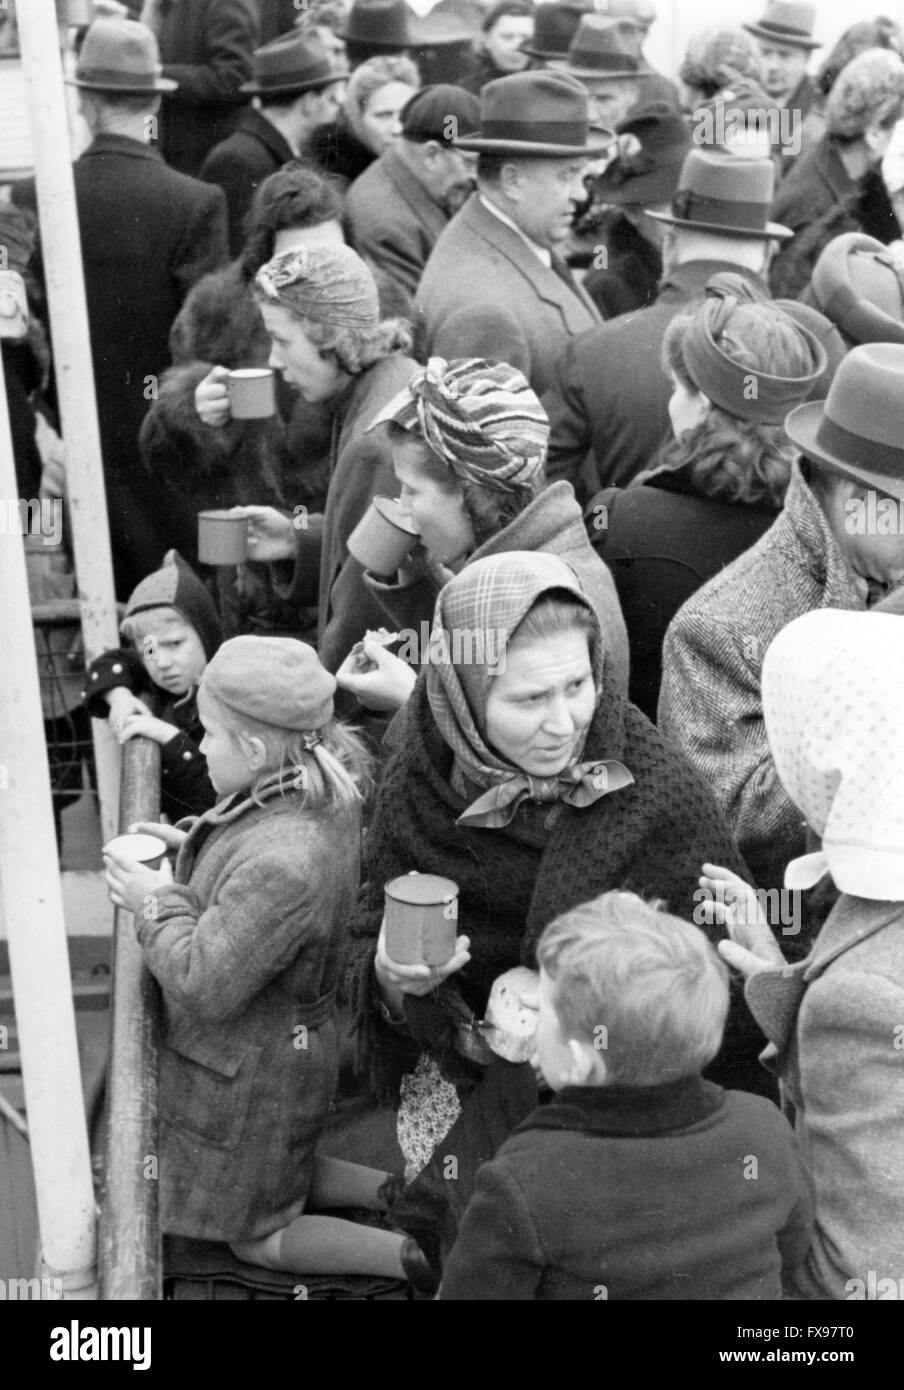 The Nazi propaganda image depicts volksdeutsche (ethnic German) refugees from Yugoslavia that are provided with warm drinks after they arrived on the steamer 'Uranus' in Pressburg (today: Bratislava/Slovakia). The photo was taken in April 1941. Fotoarchiv für Zeitgeschichtee - NO WIRE SERVICE - Stock Photo